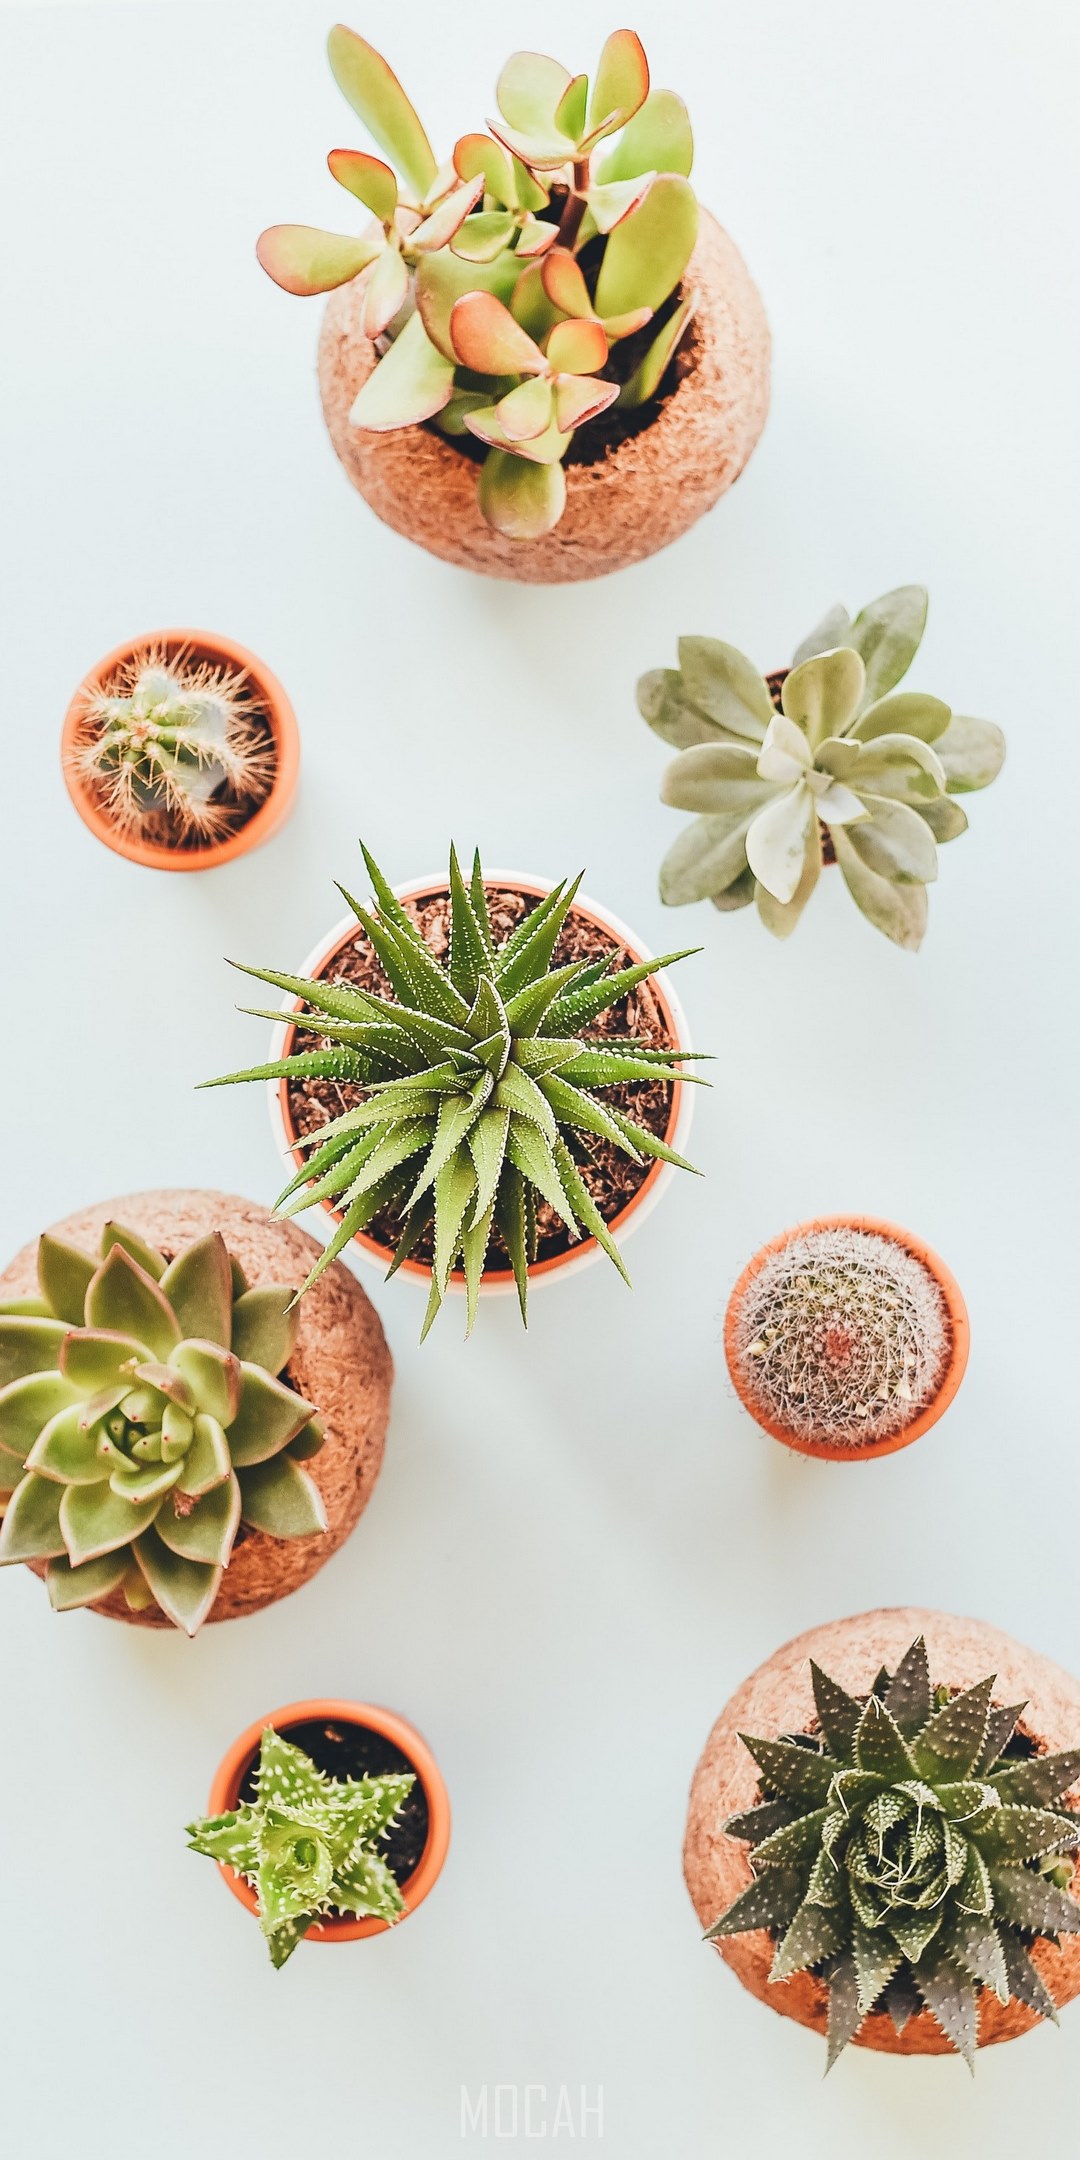 A group of plants in small pots - Succulent